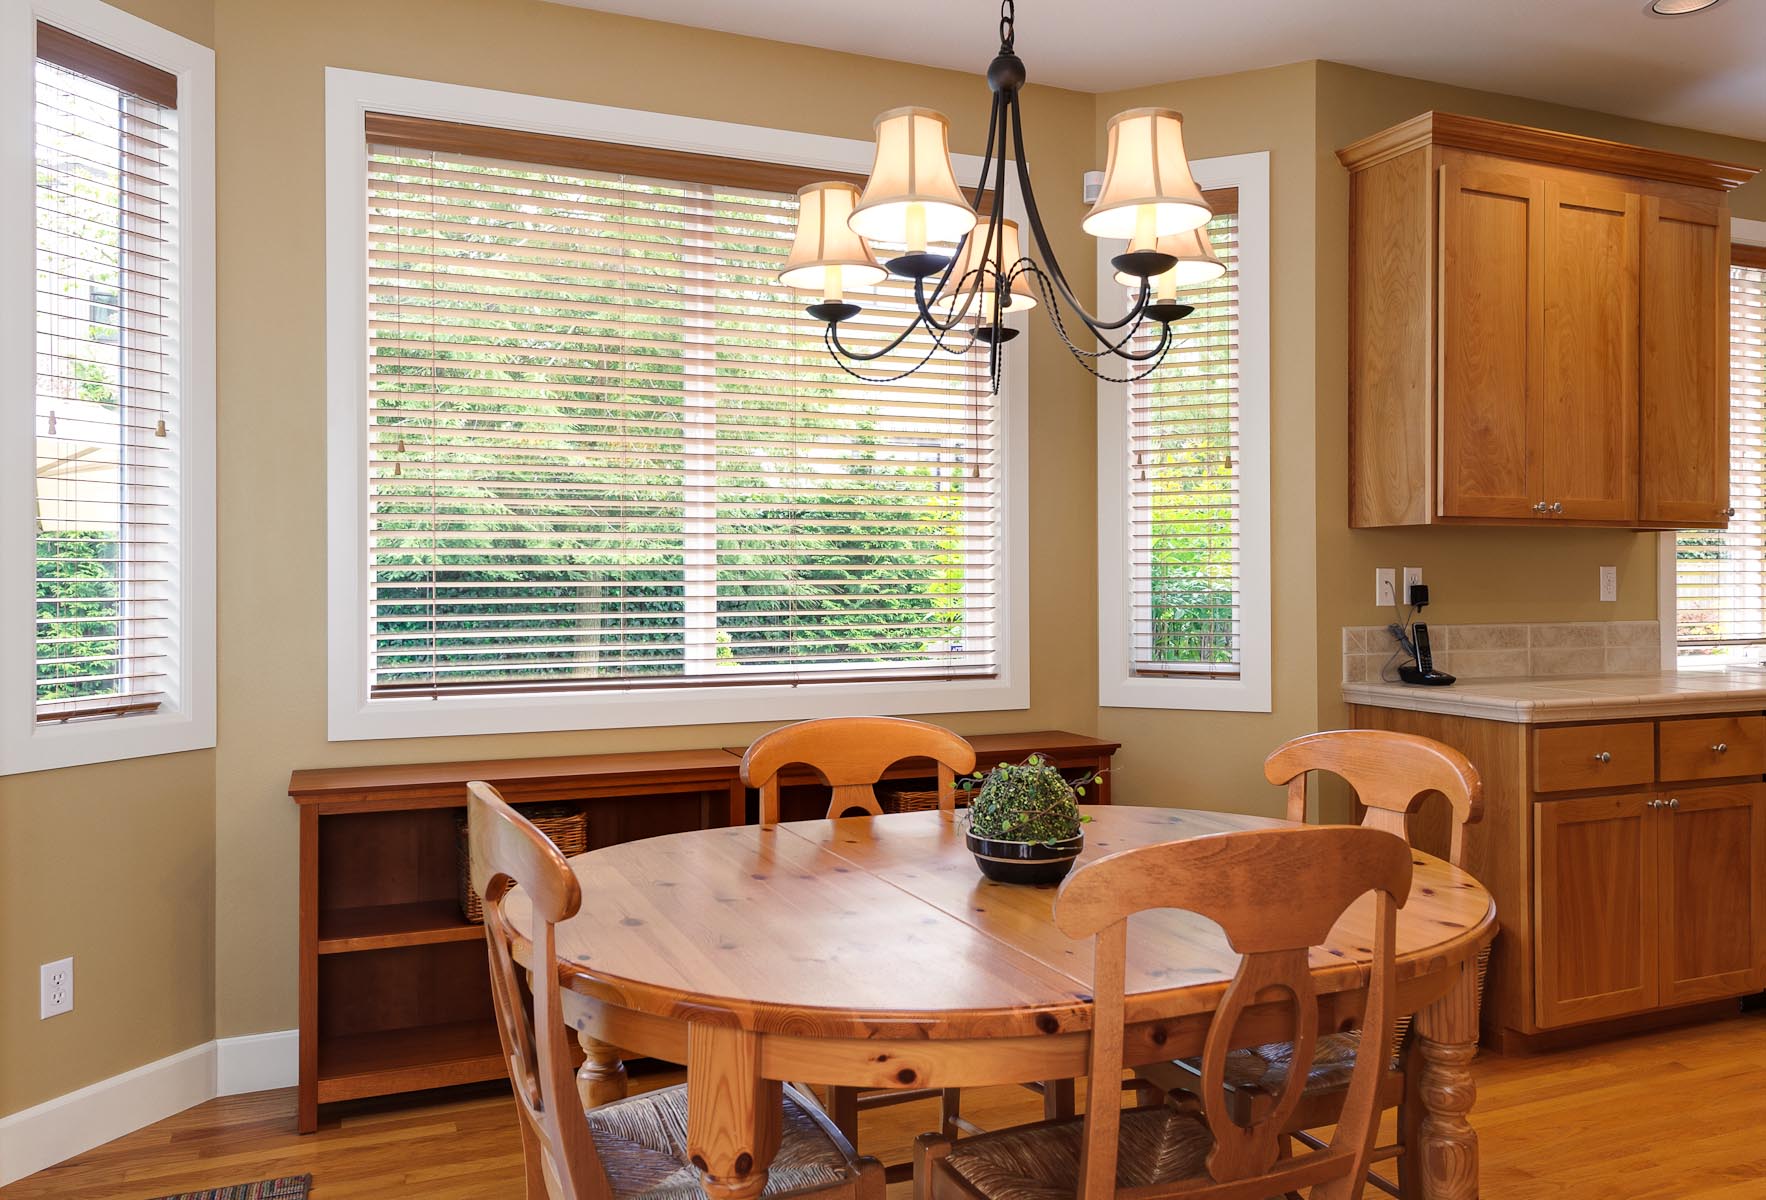 Getting New Windows In Your Sammamish Home From A Quality Window Contractor.